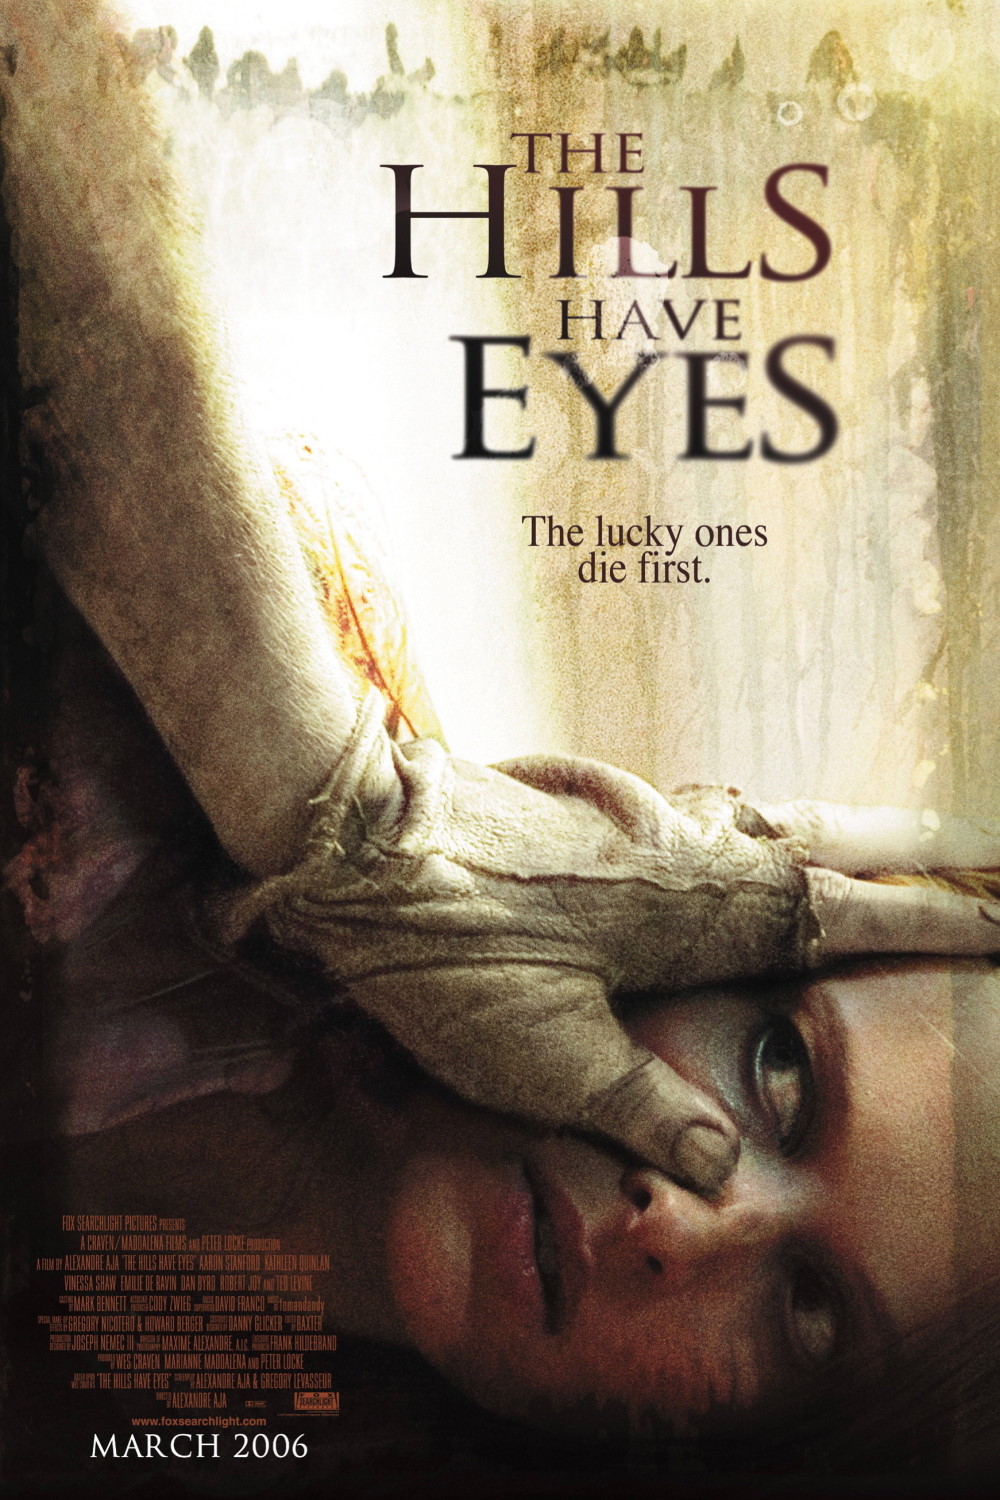 The Hills Have Eyes (2006) Poster